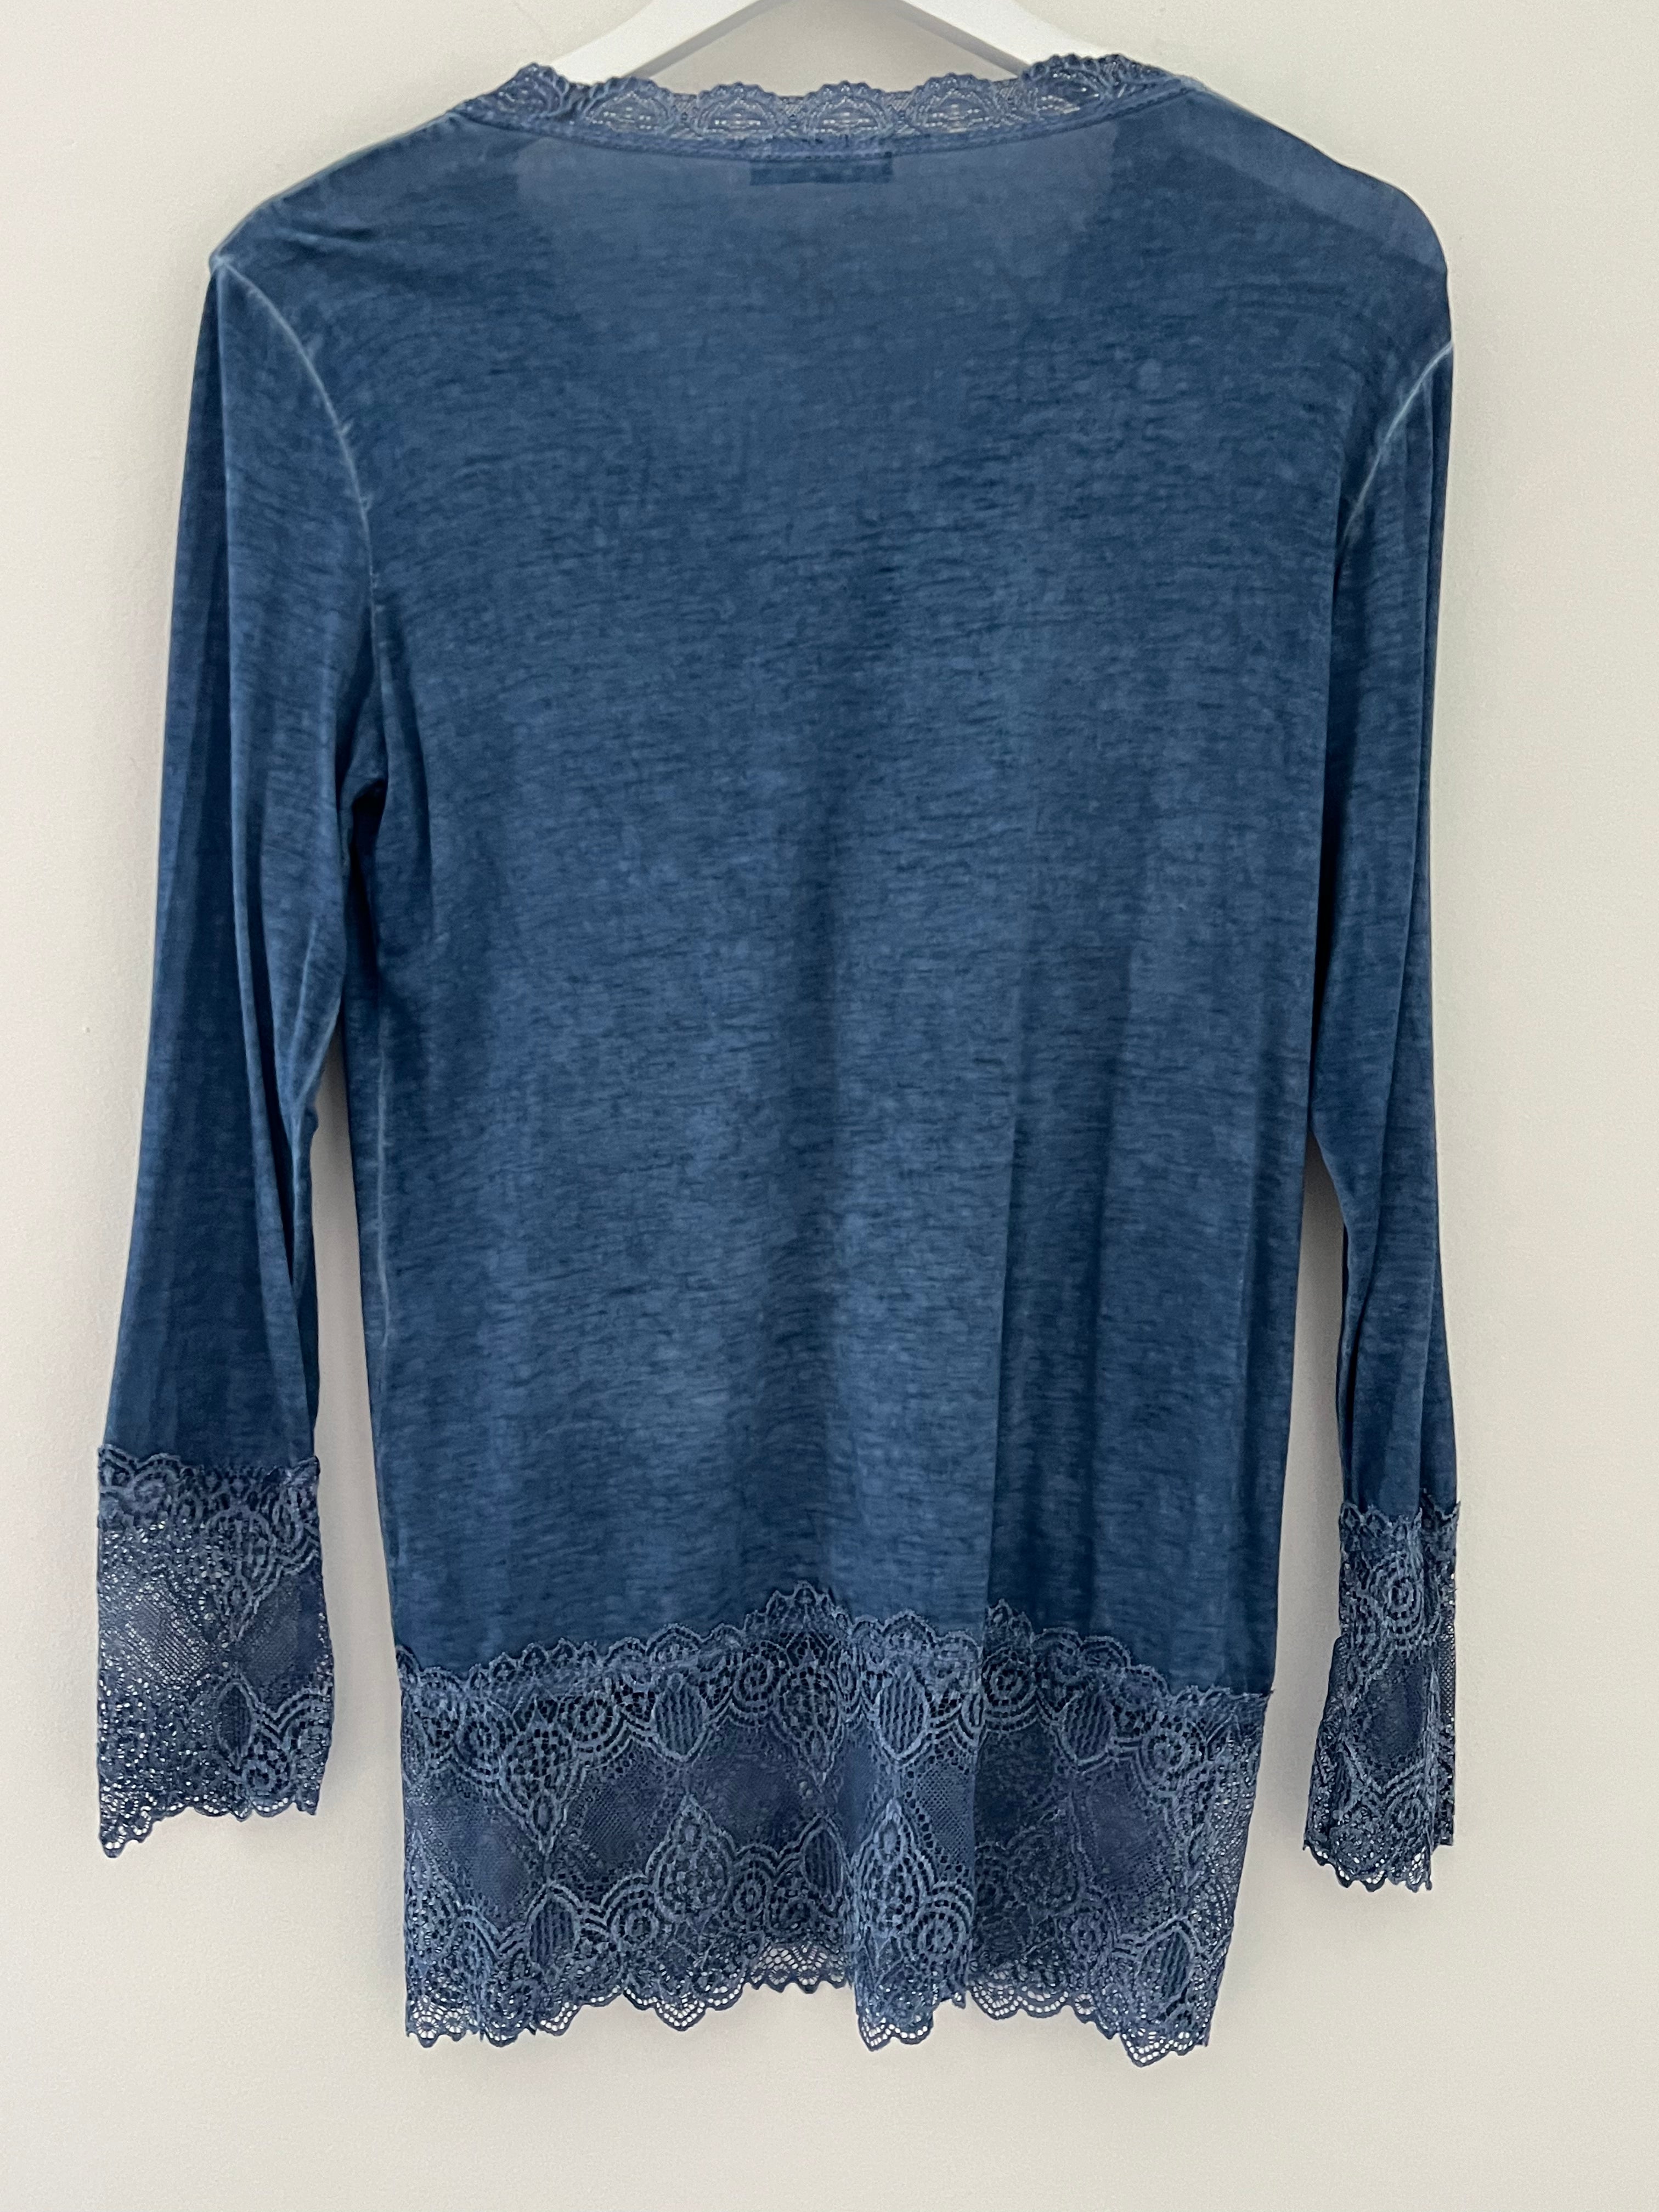 Luxe Base Top with Lace Trim in Indigo